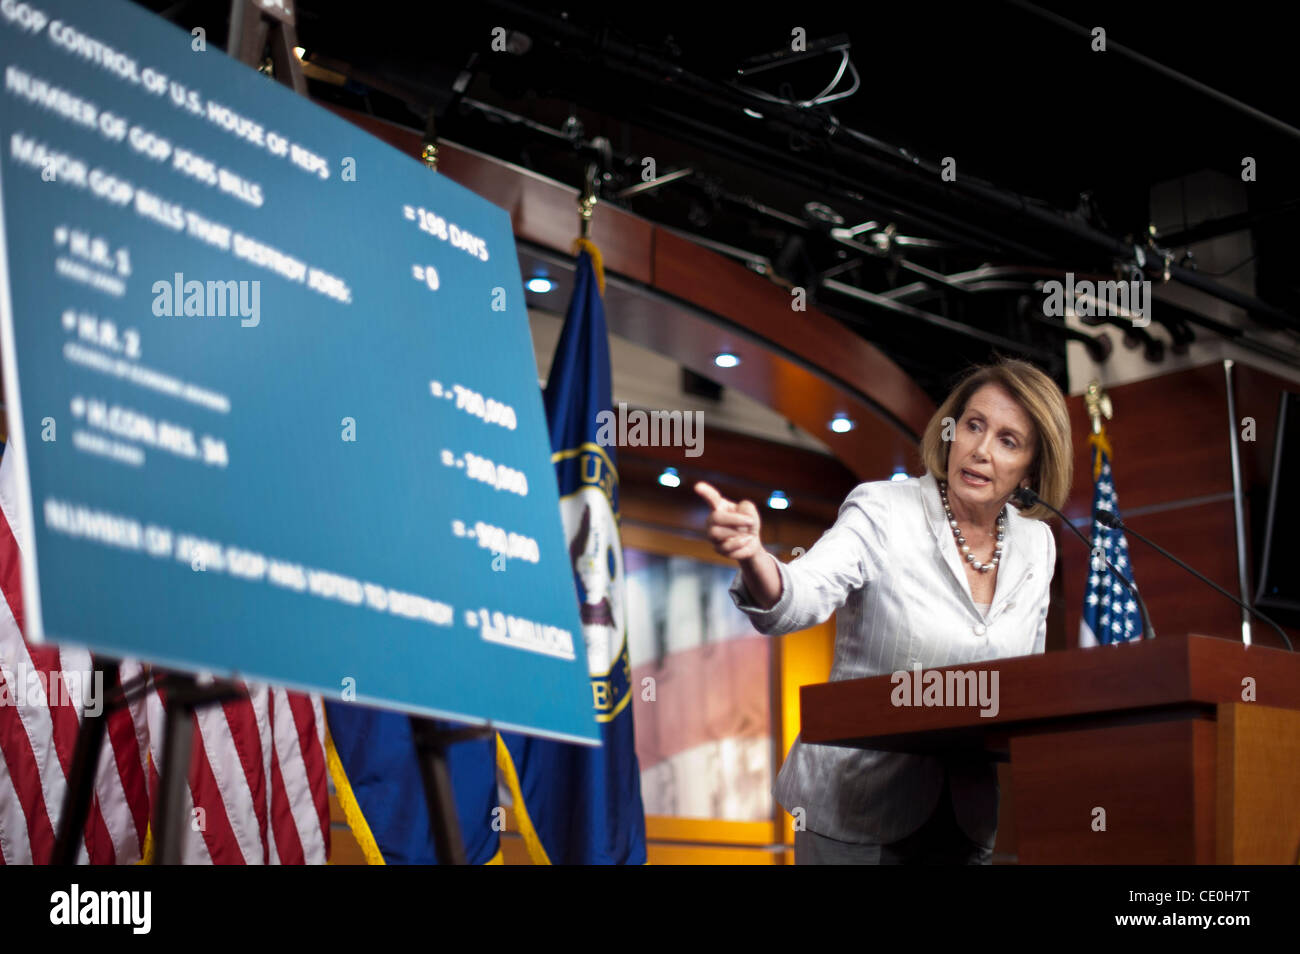 July 21, 2011 - Washington, District of Columbia, U.S. - During a press conference on Capitol Hill Thursday, House Democratic leader NANCY PELOSI called on Republicans to agree to a balanced, bipartisan deal to avoid a debt crisis. Pelosi said default would create harsh economic consequences across  Stock Photo